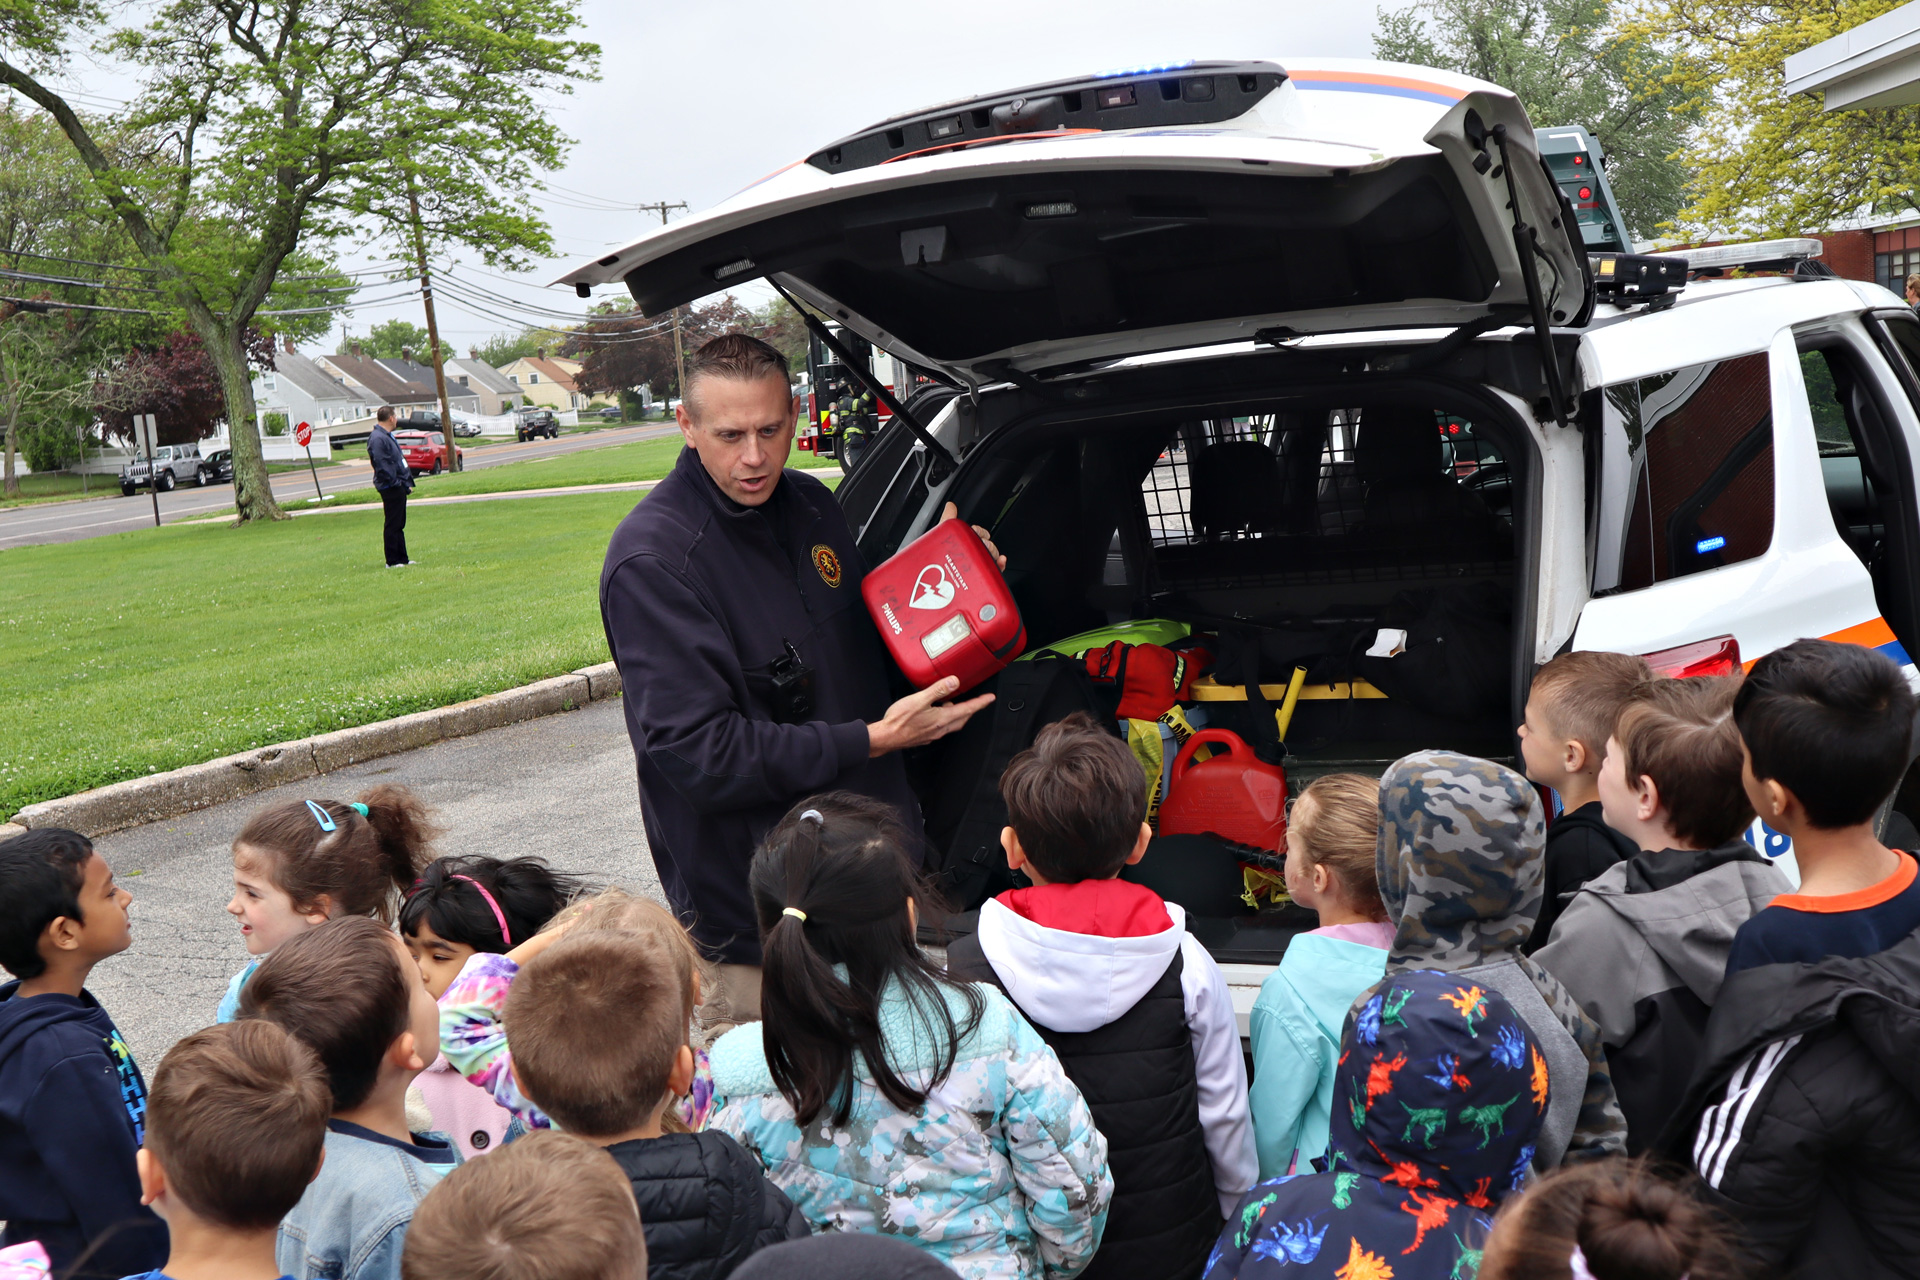 Nassau County Police Department officers showed students equipment.